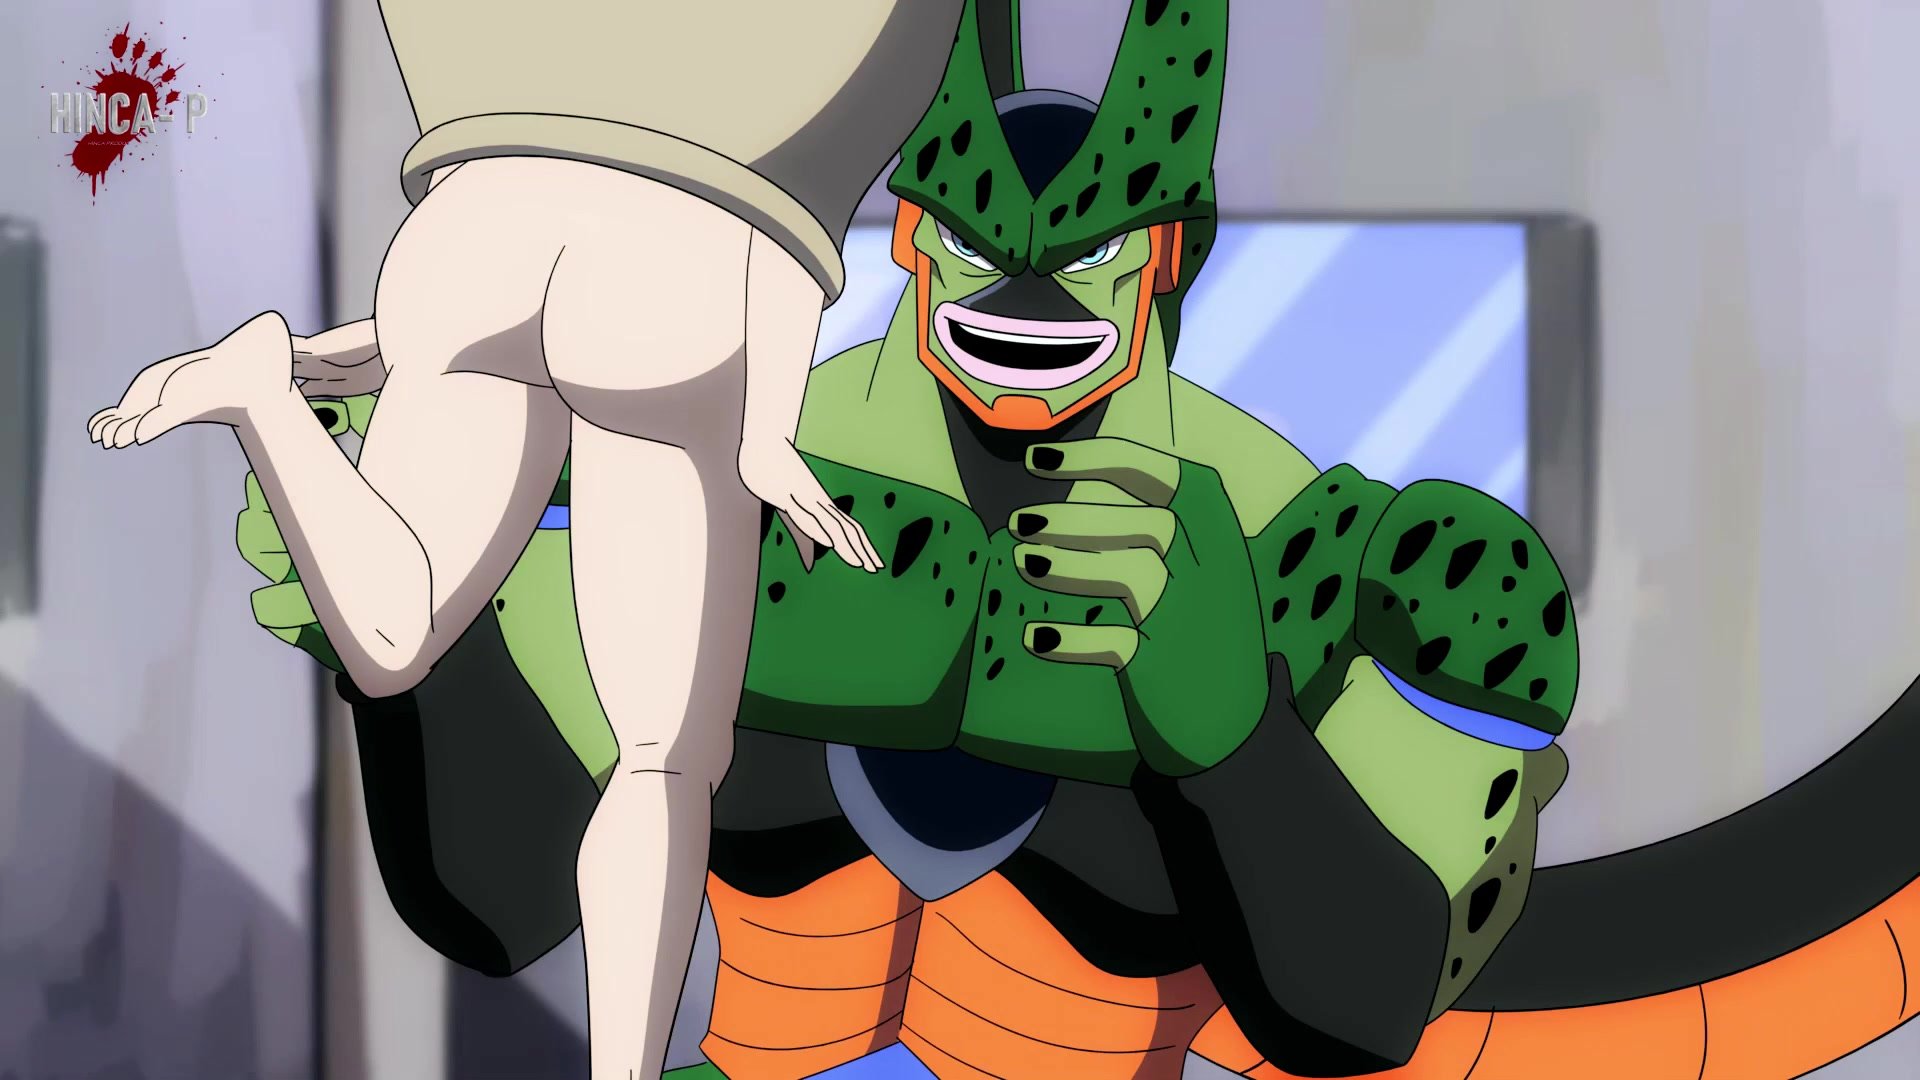 Cell Absorbs Android 18 (HincaP)